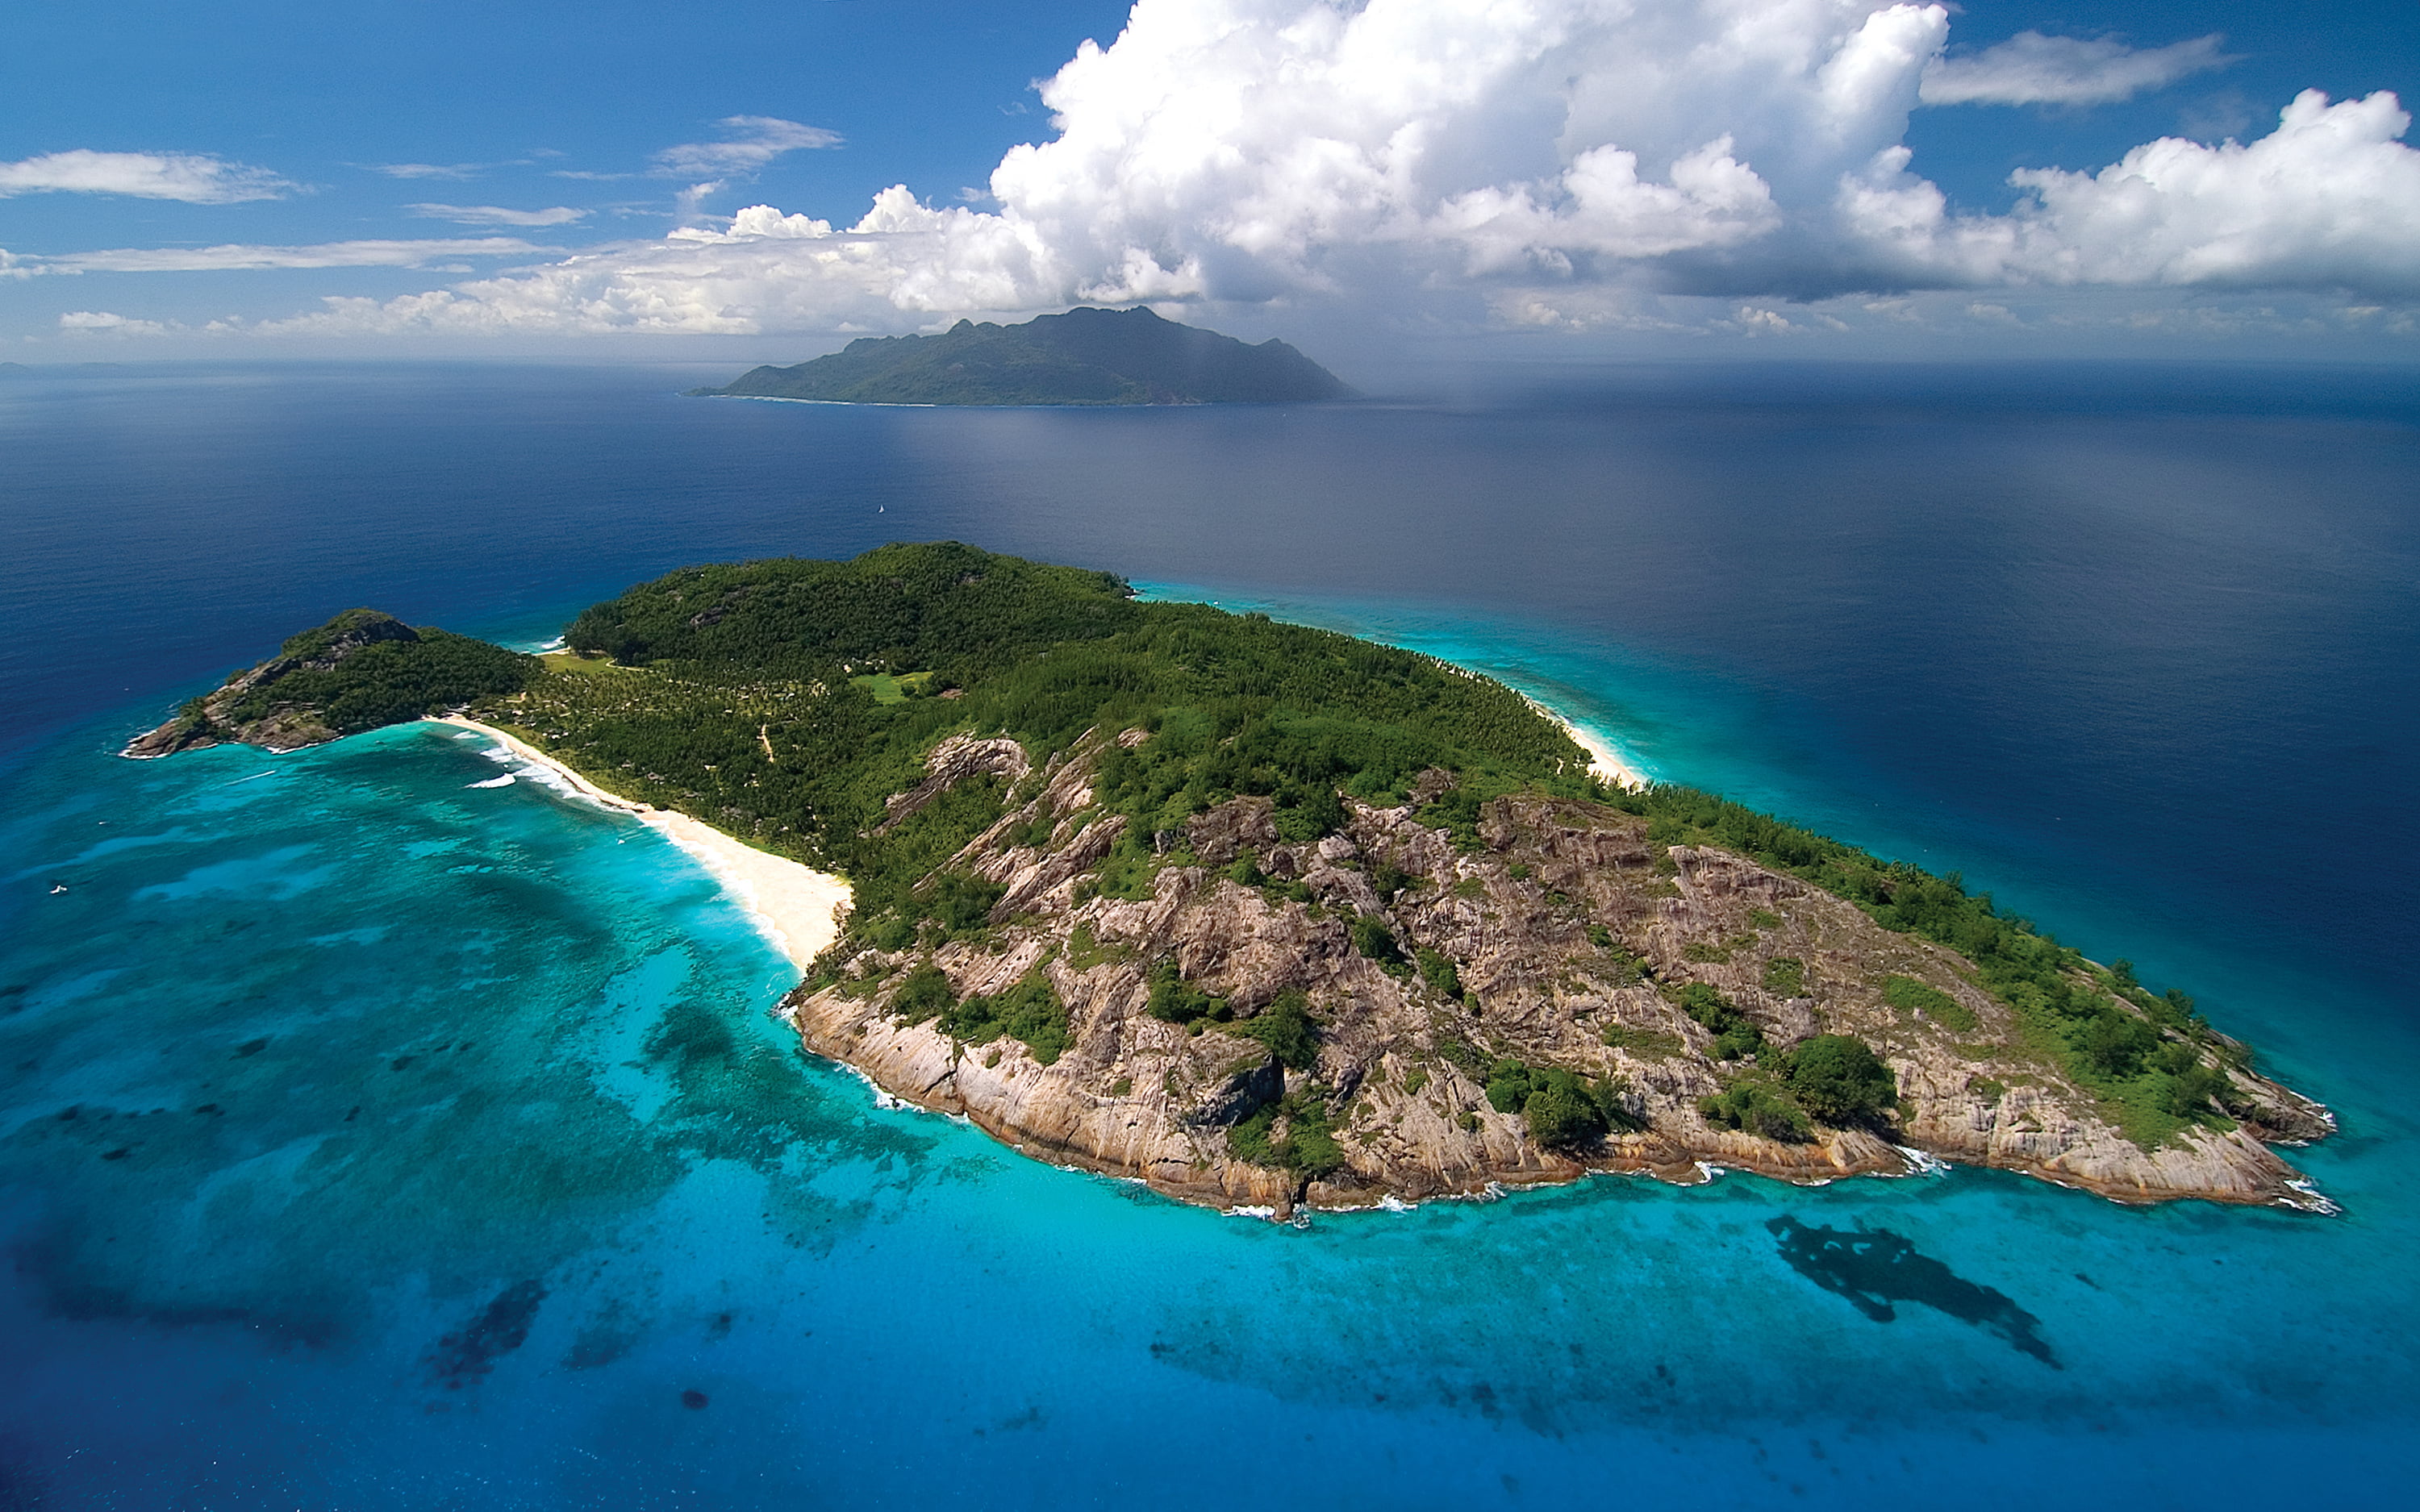 North Island One Of The Forty Granite Islands Of The Seychelles In The Indian Ocean 11 Luxury Villas Tropical Oasis Green Vegetation 3000×1875